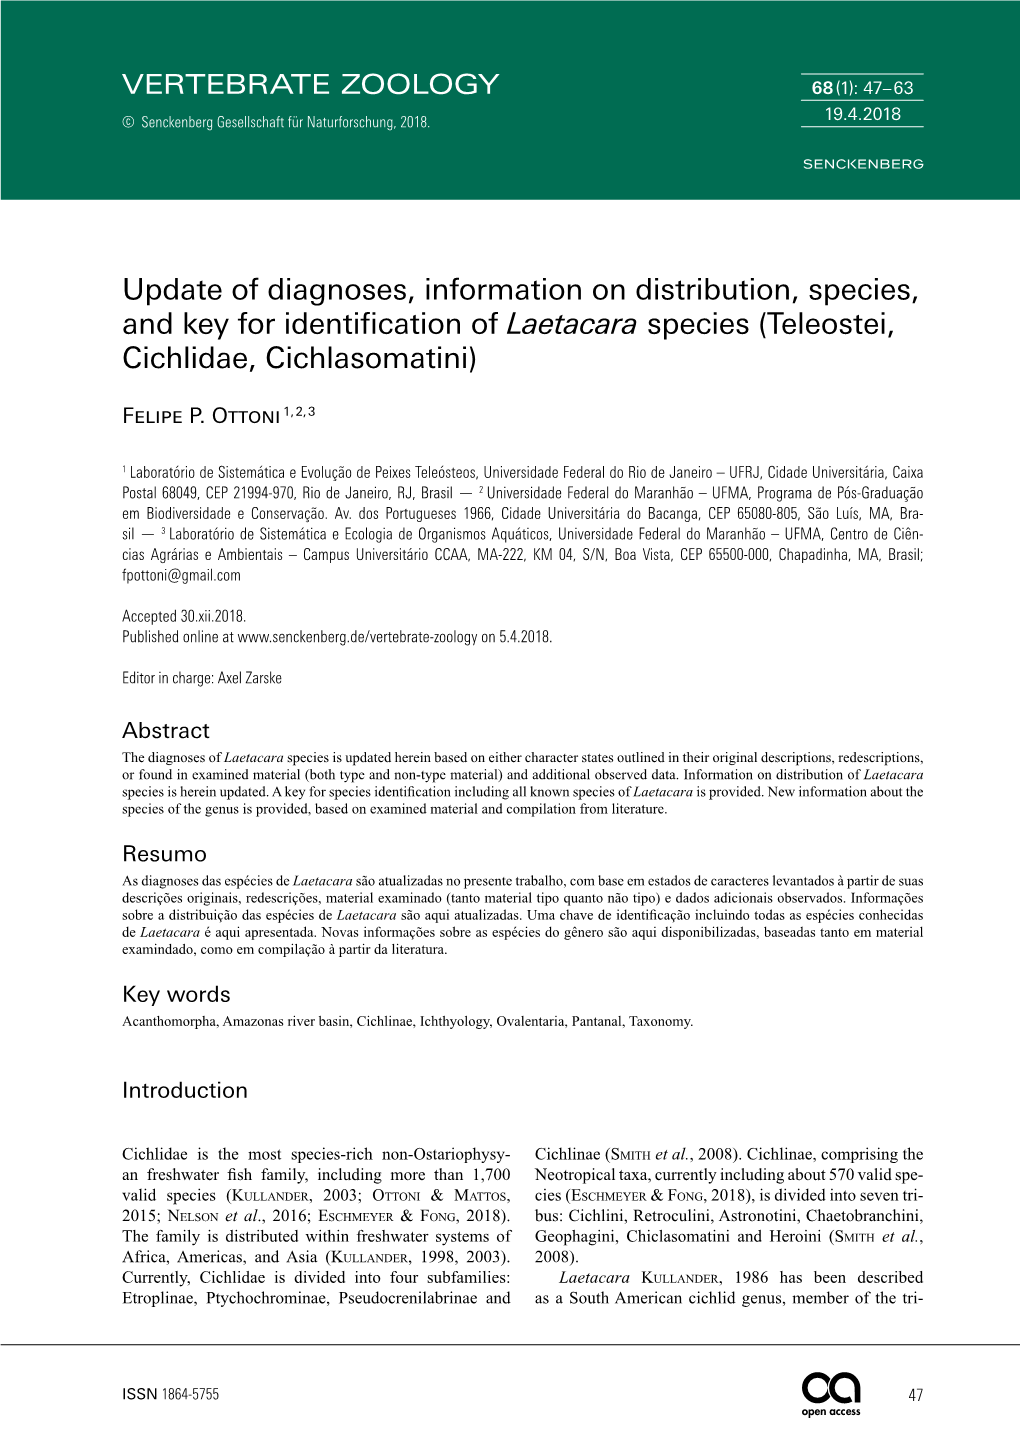 Update of Diagnoses, Information on Distribution, Species, and Key for Identification of Laetacara Species (Teleostei, Cichlidae, Cichlasomatini)